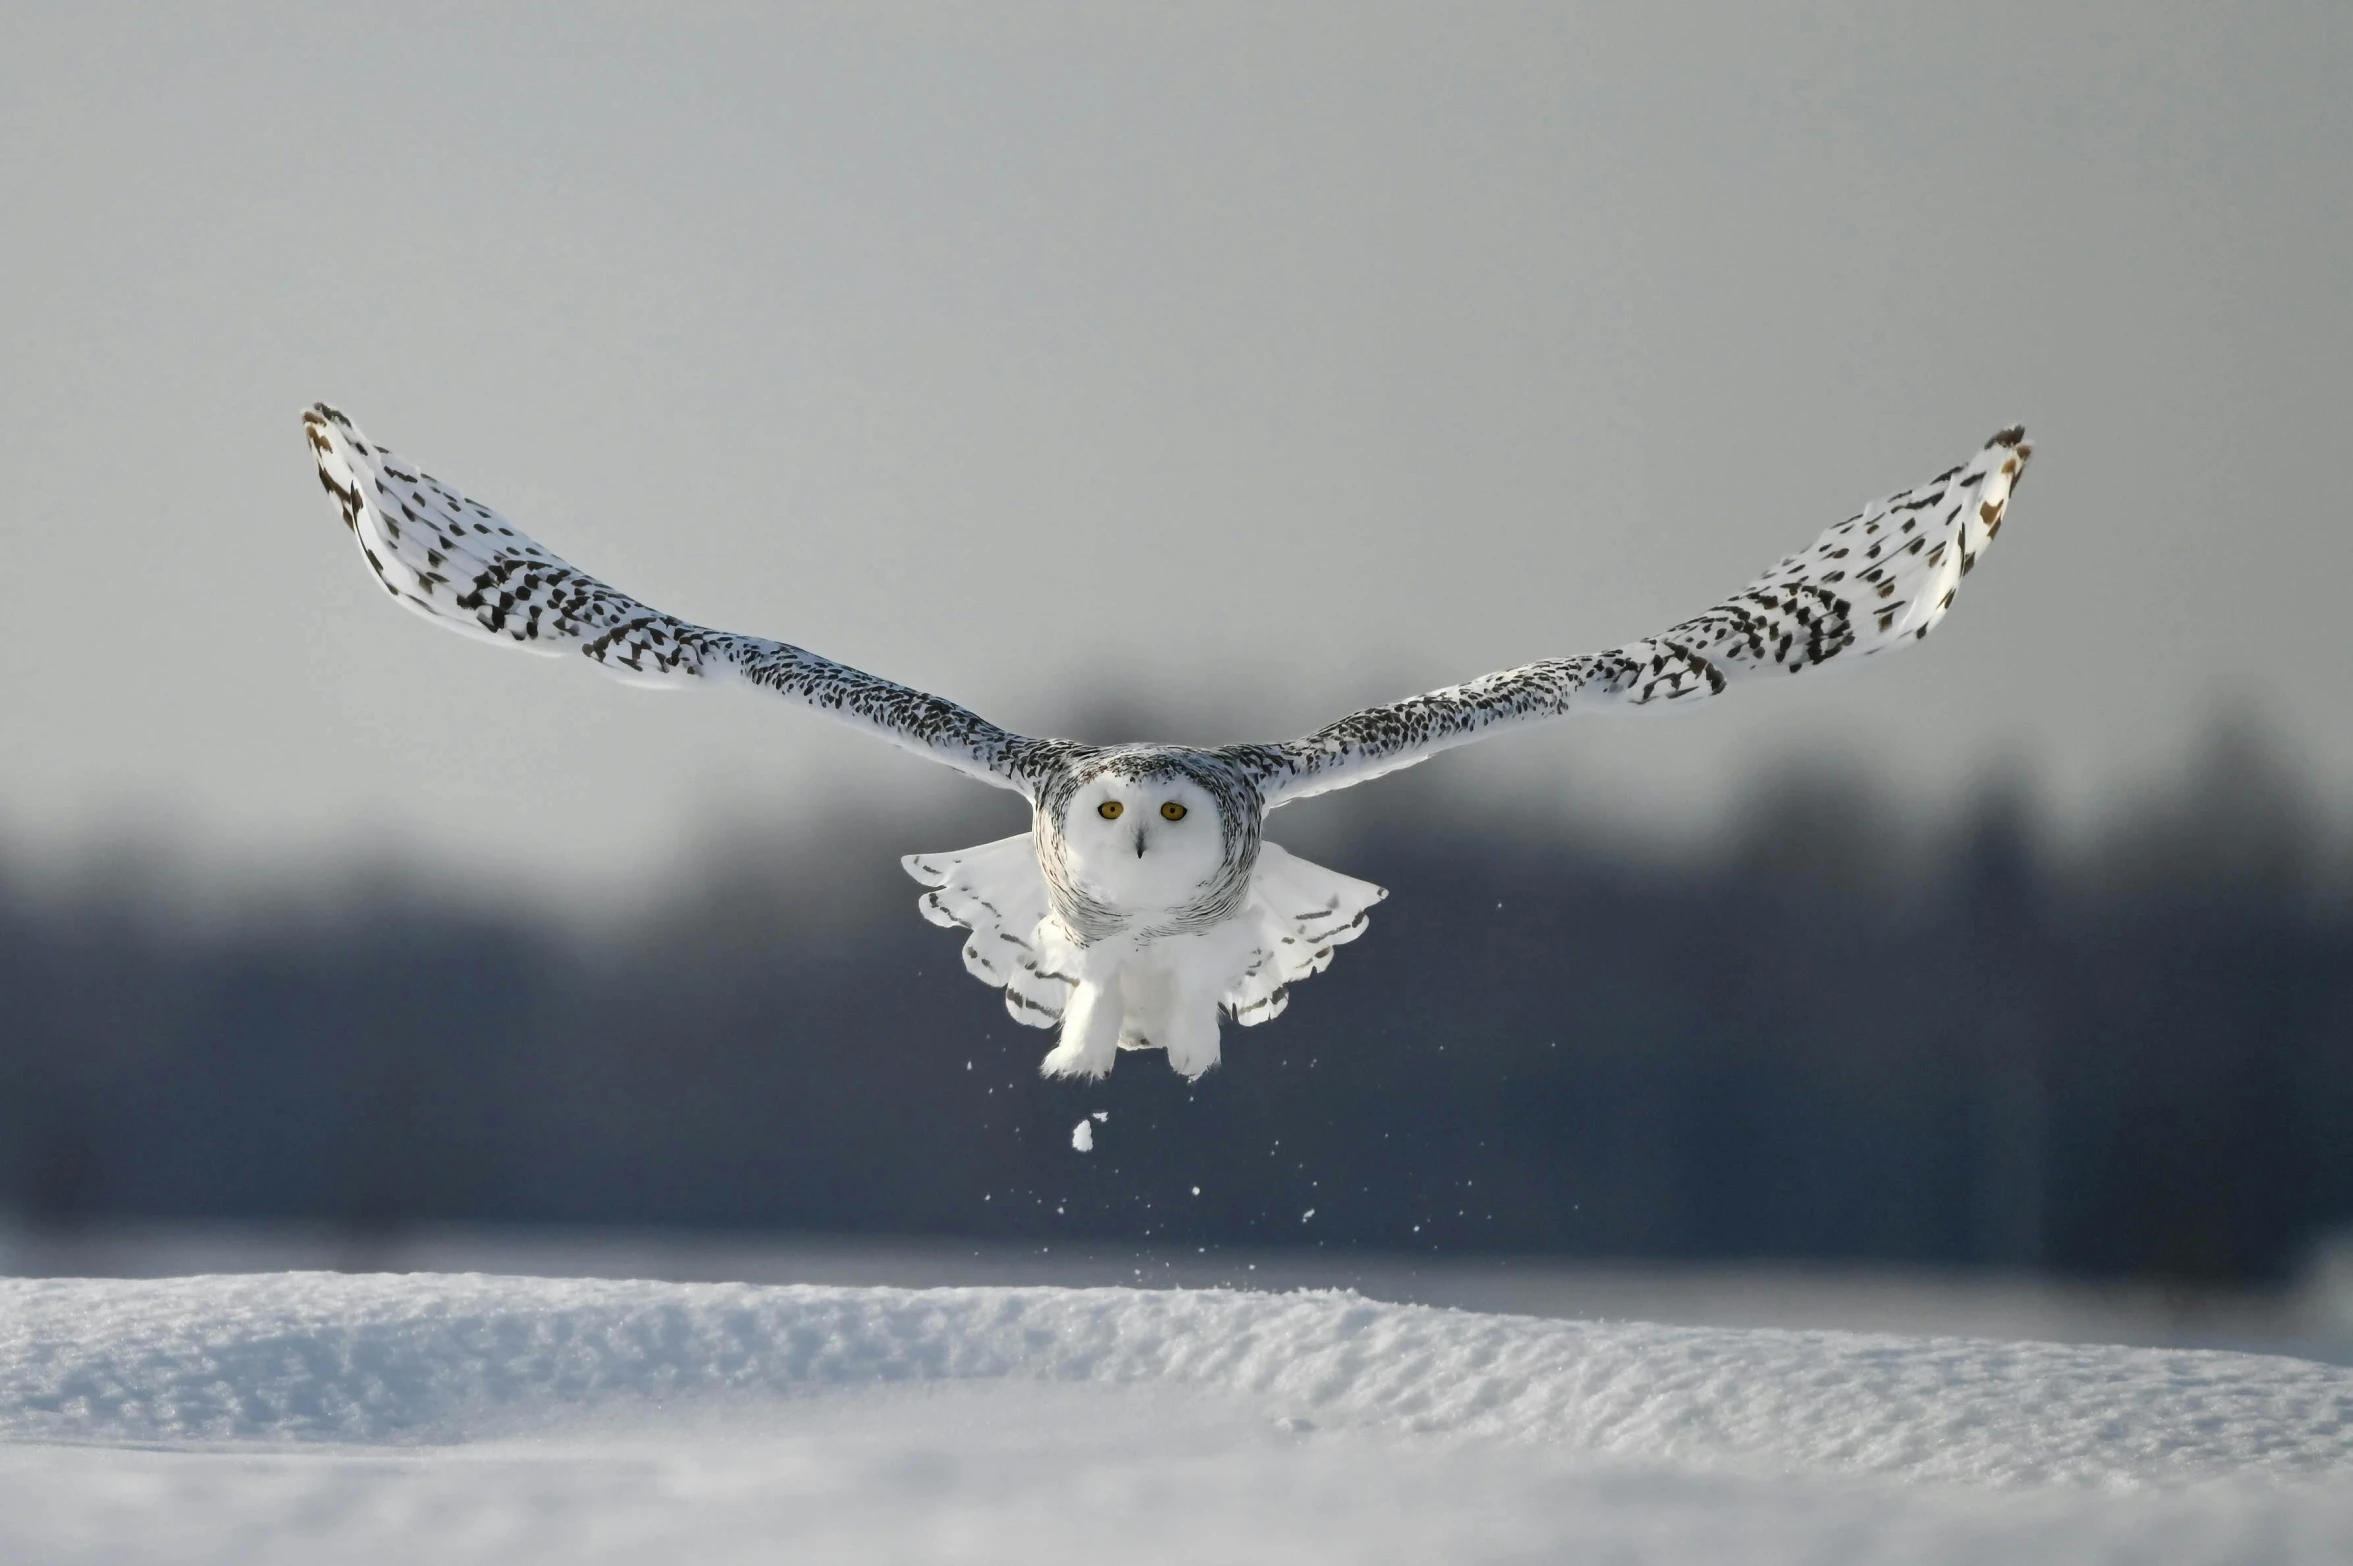 a owl taking off from the ground in a snow covered area